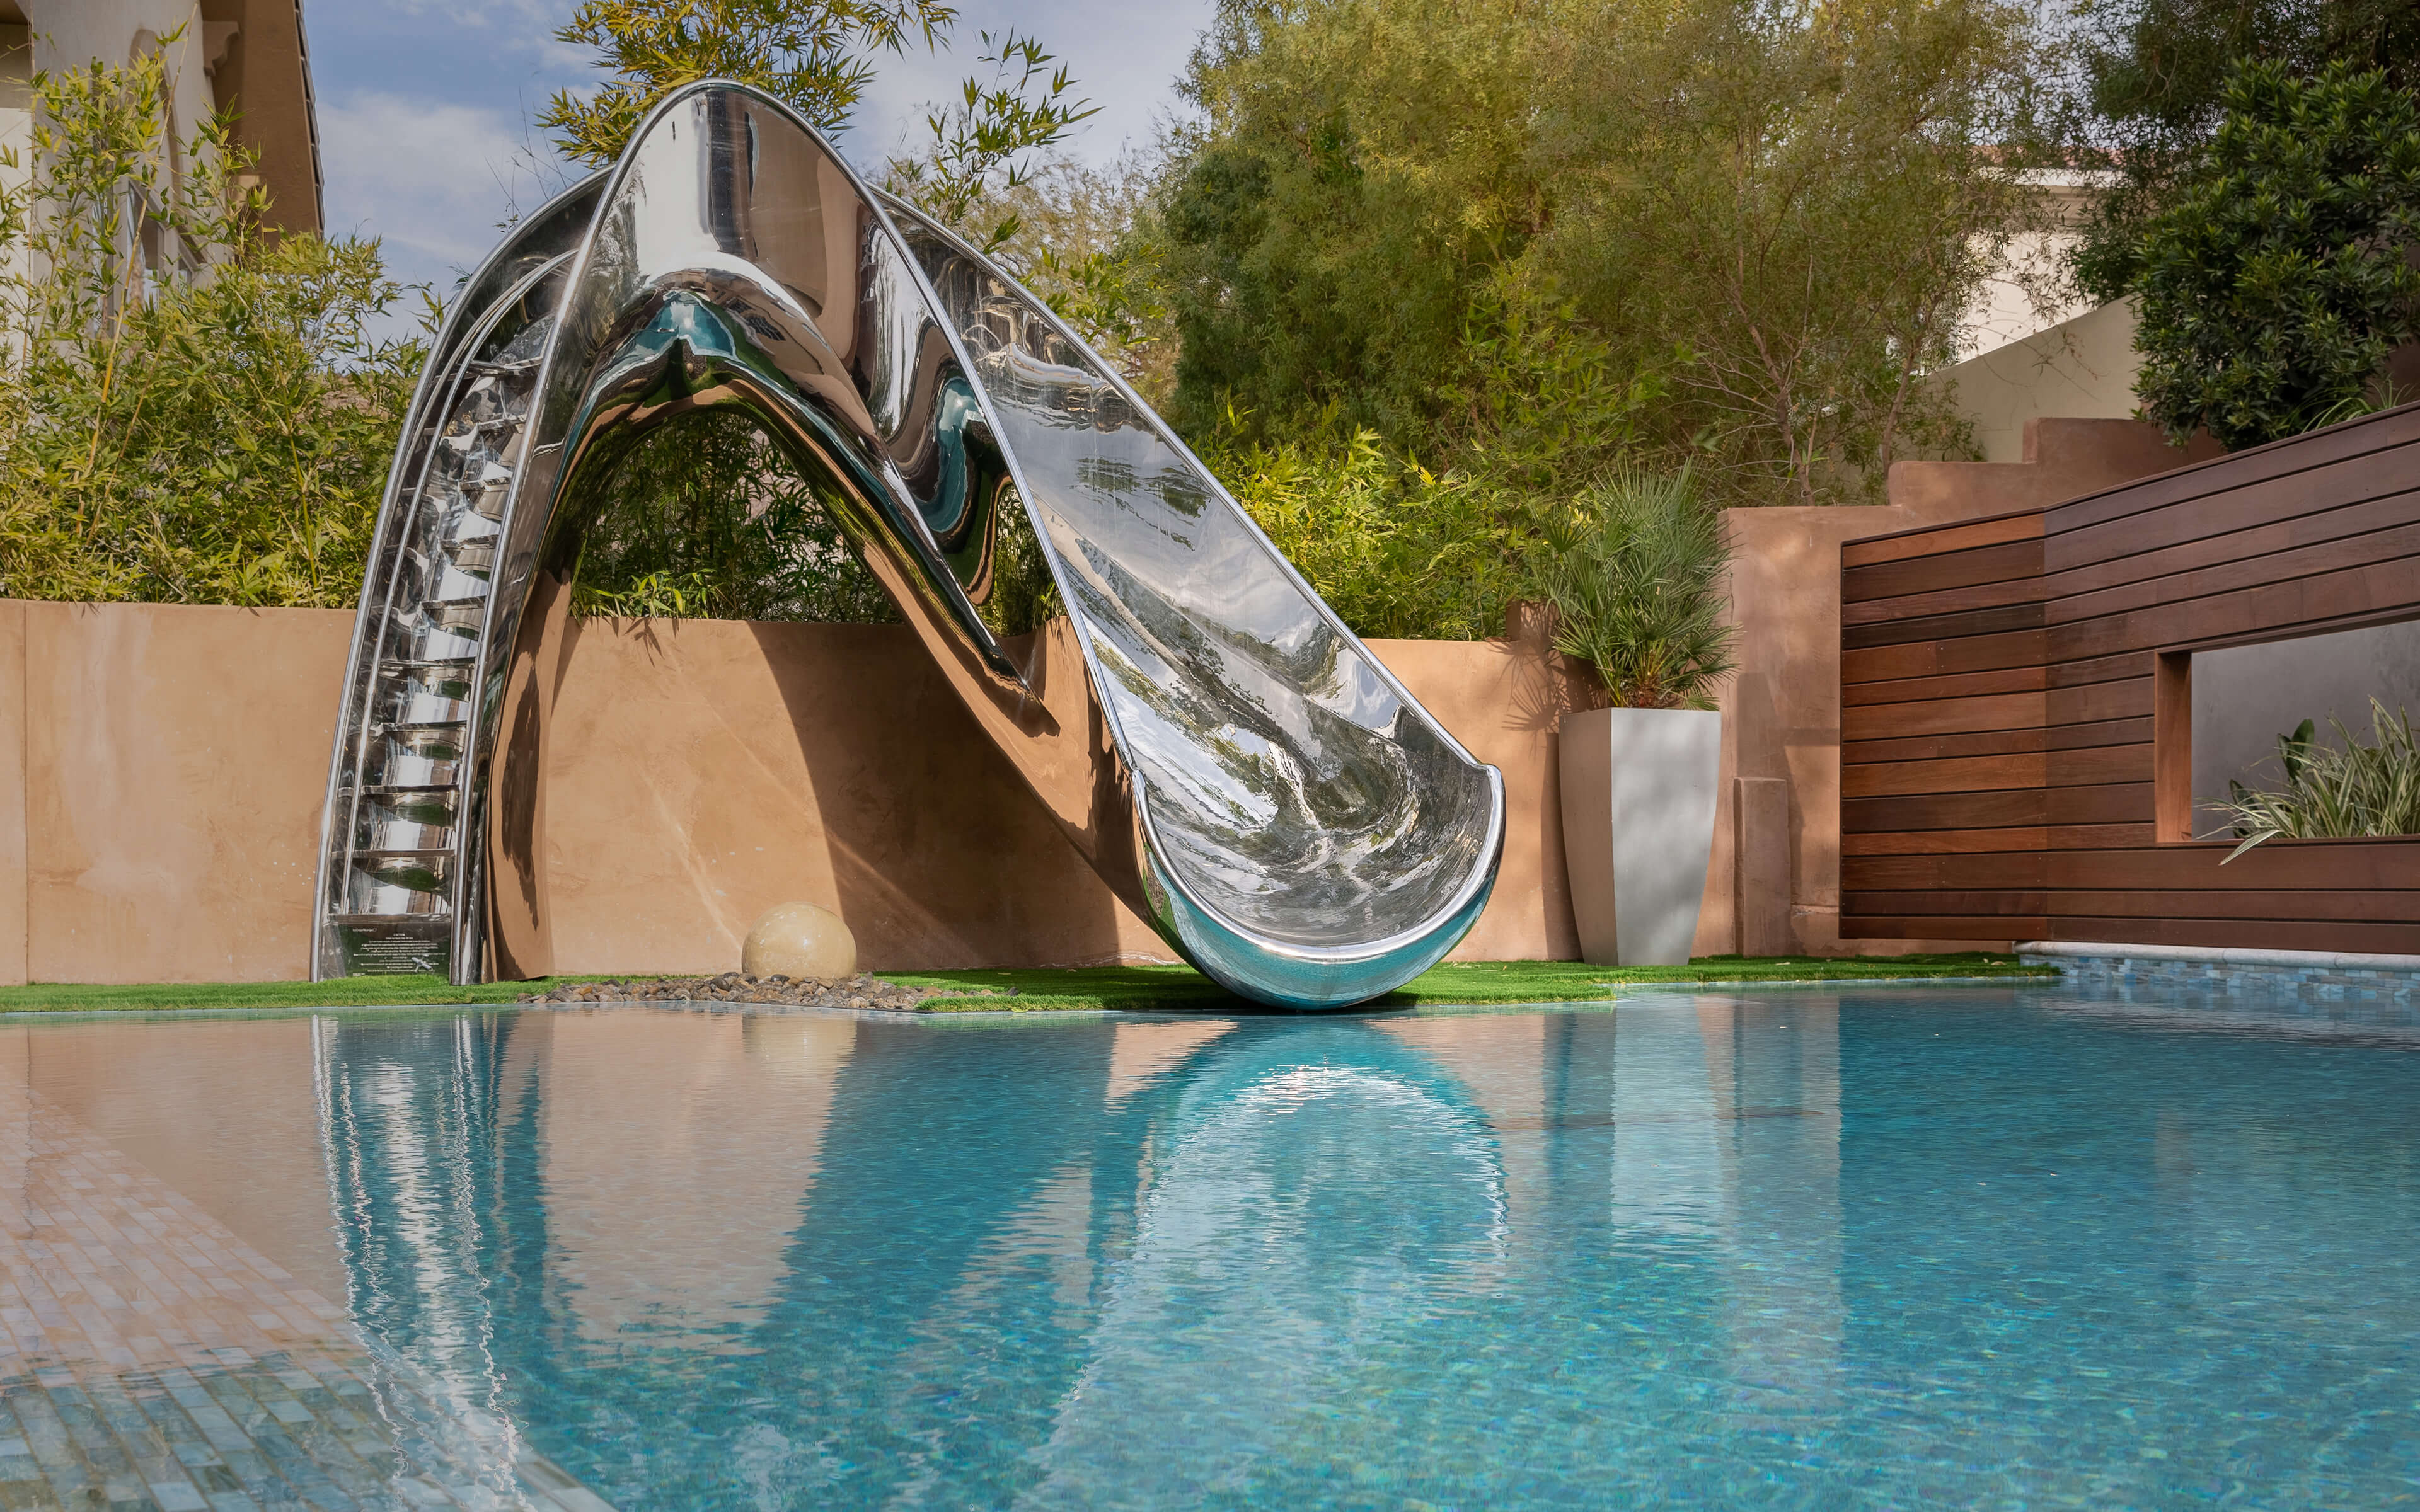 Pool Slides, Water Features